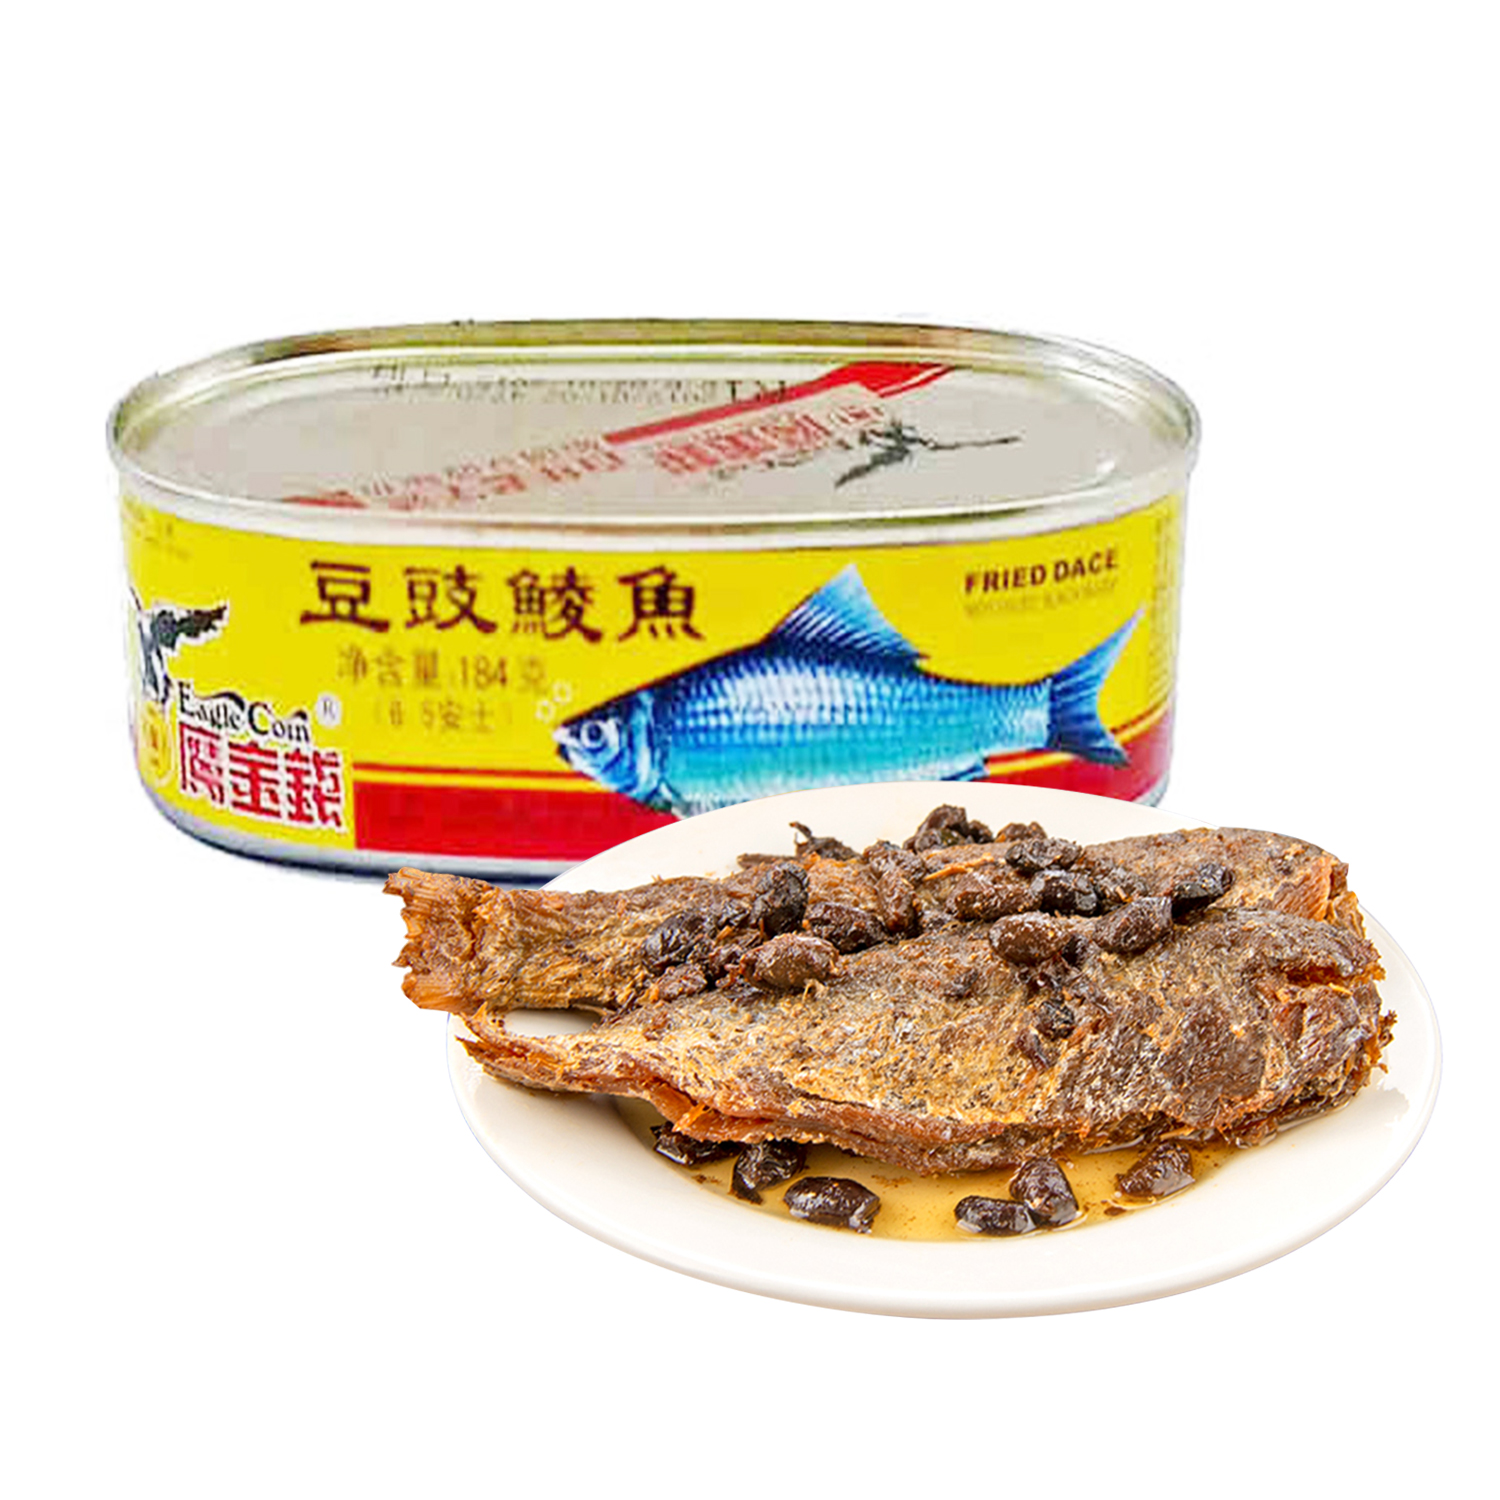 Eagle Coin Fried Dace Black Bean 184g-eBest-Condiments,Pantry